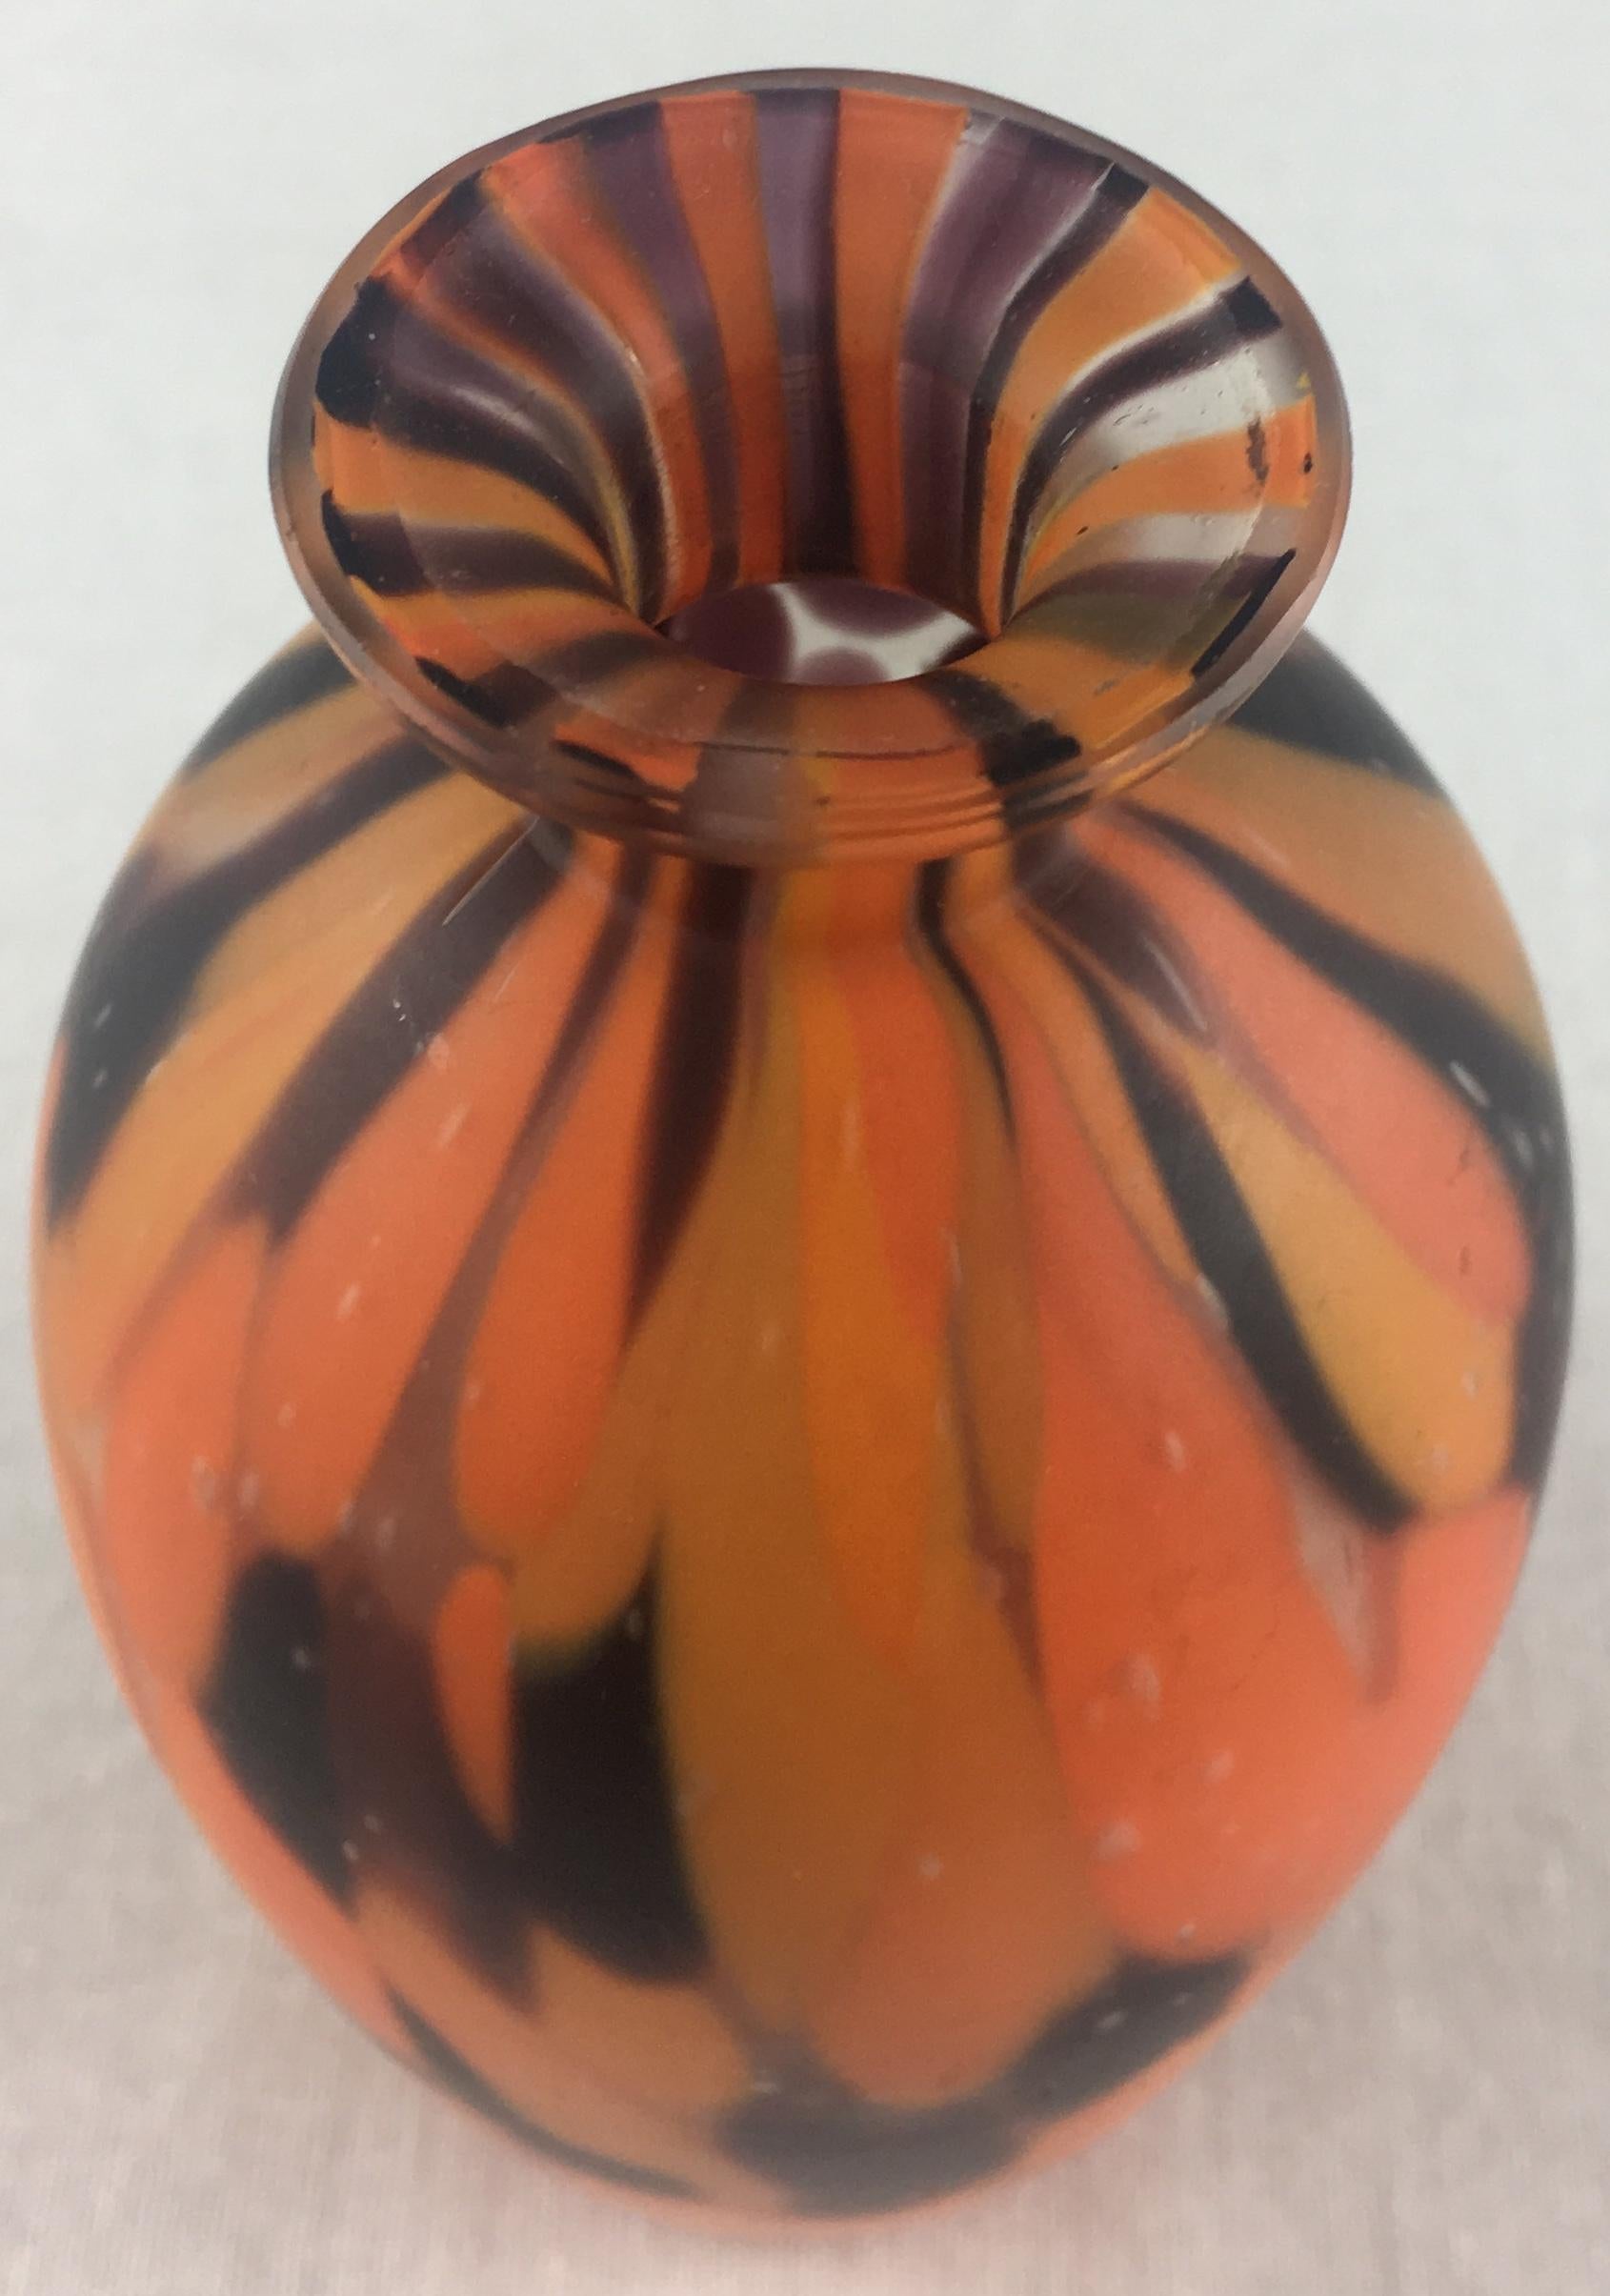 Stunning French Art Deco glass perfume bottle, very collectible dating from the 1930s. Absolutely beautiful colors. 

Very good condition with some minor fading on the top from use, see detailed photos.

No cracks or chips.
  